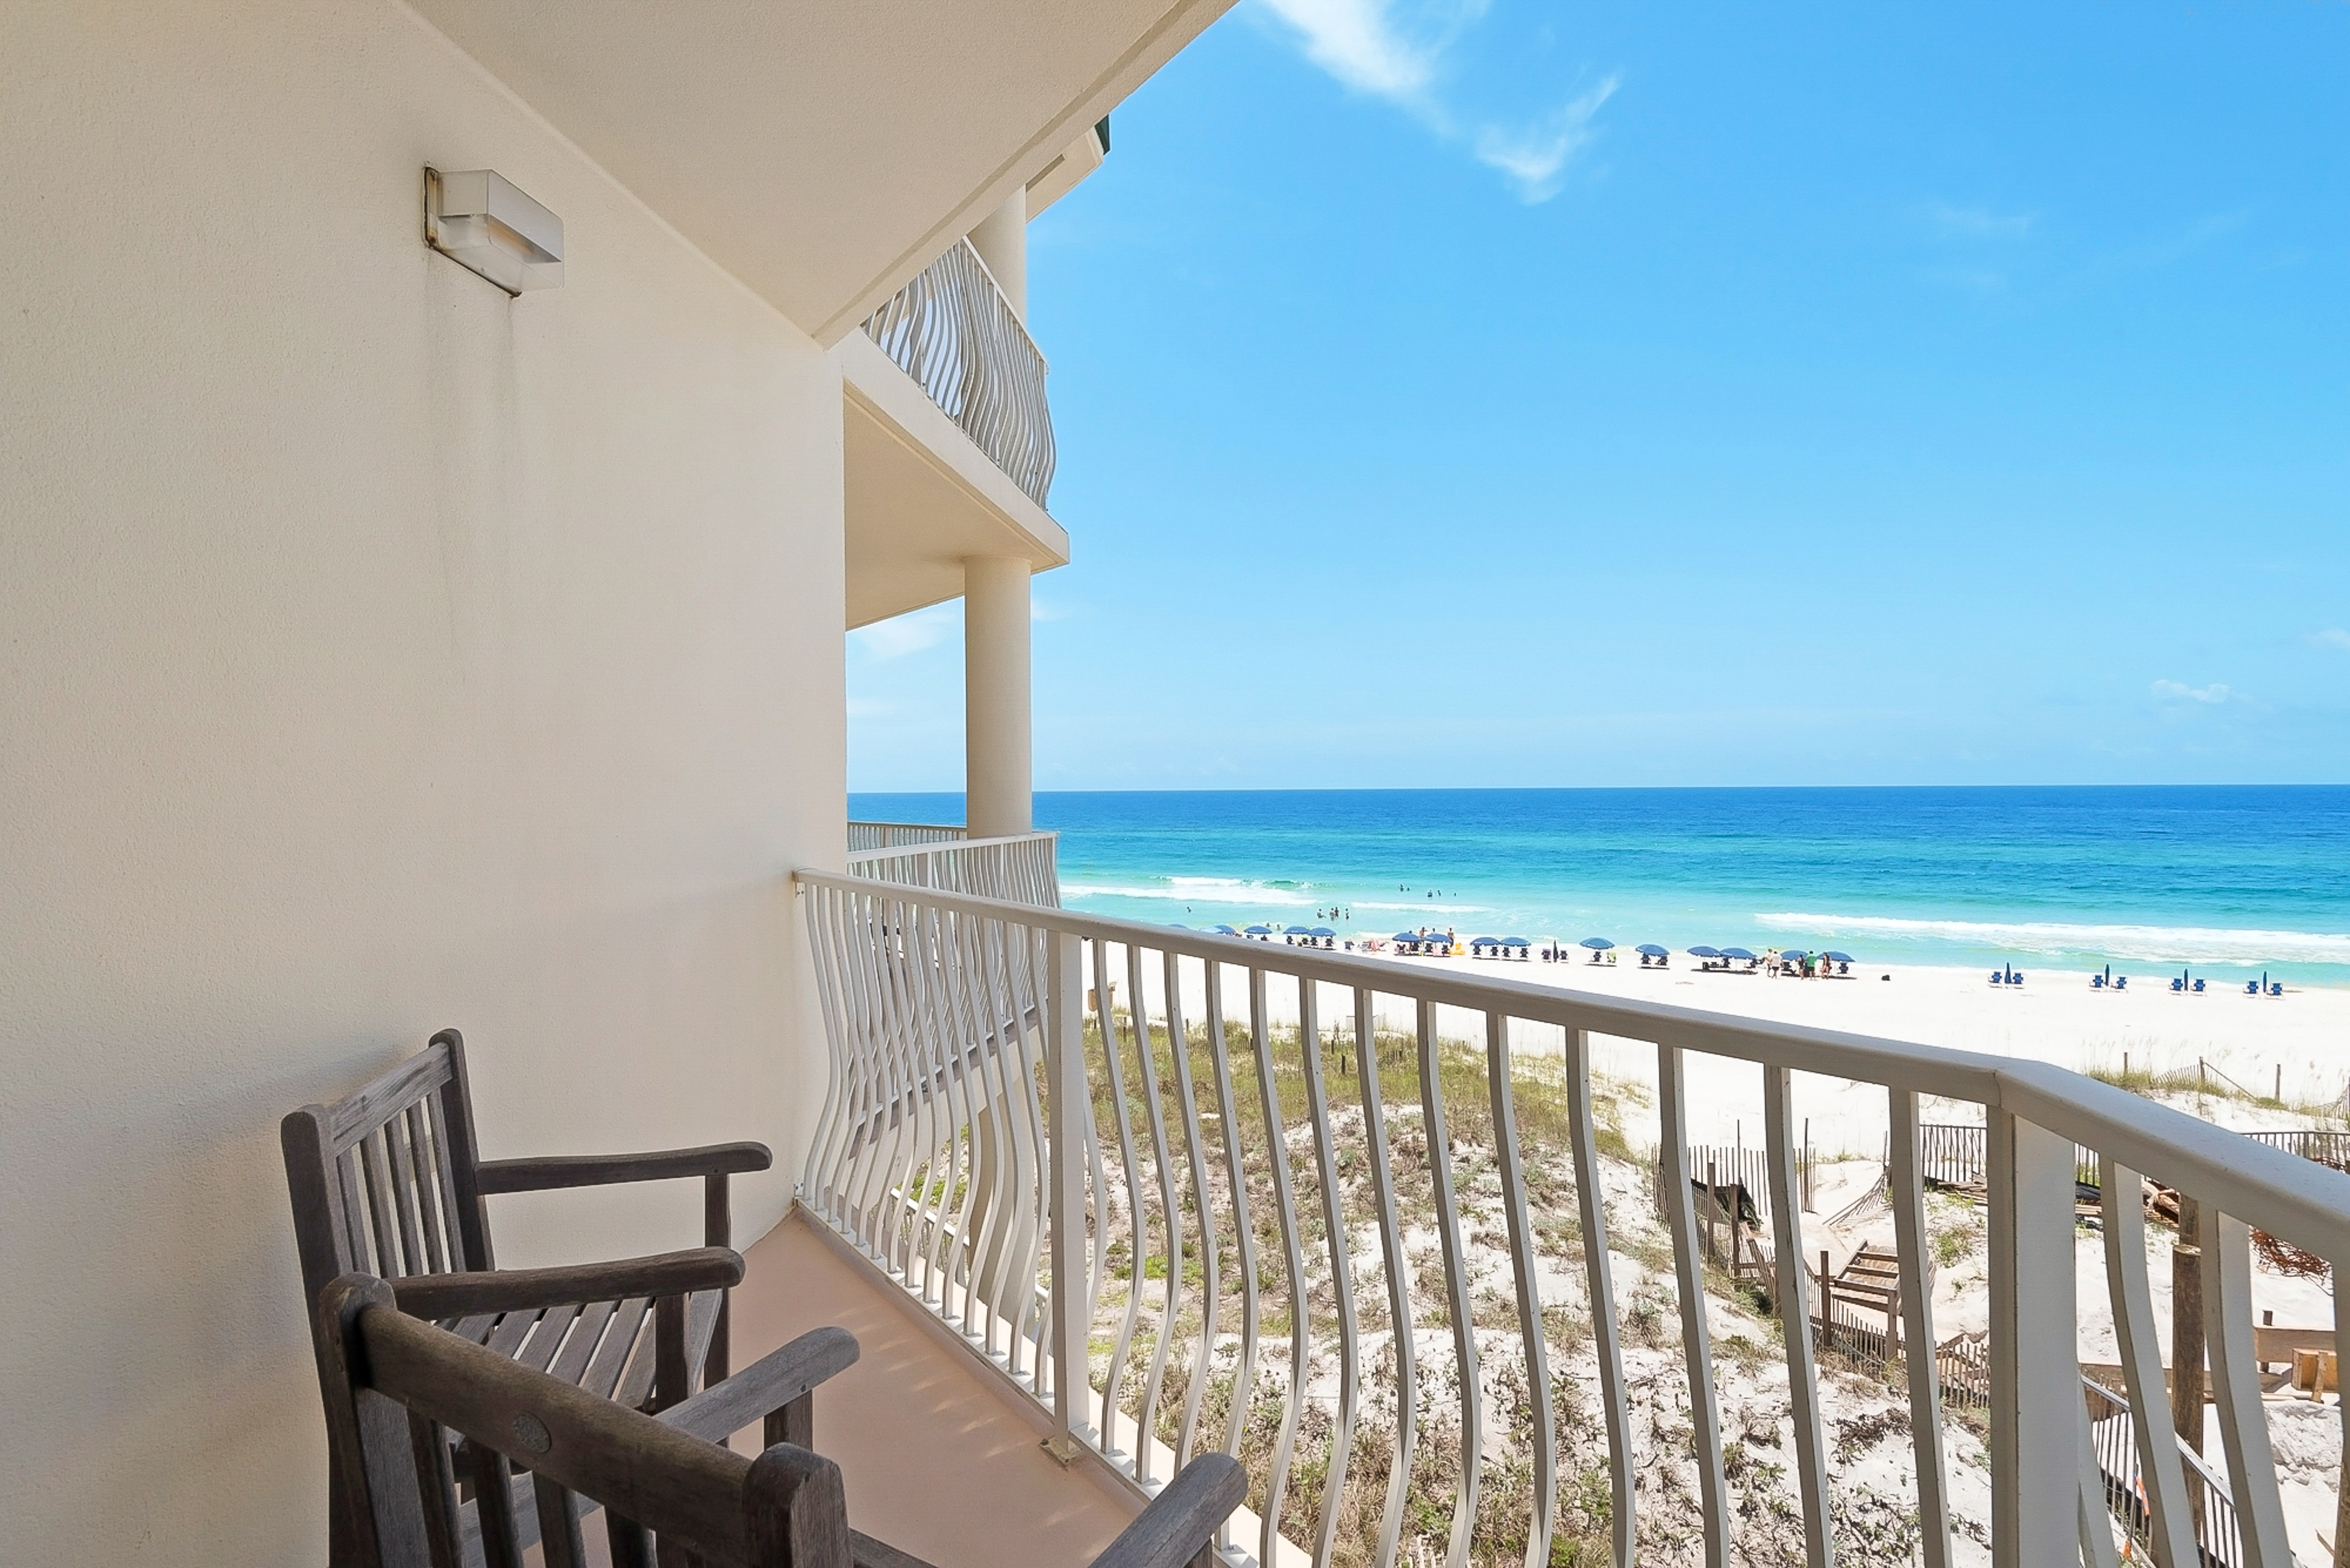 Dunes of Seagrove B305 Condo rental in Dunes of Seagrove in Highway 30-A Florida - #24